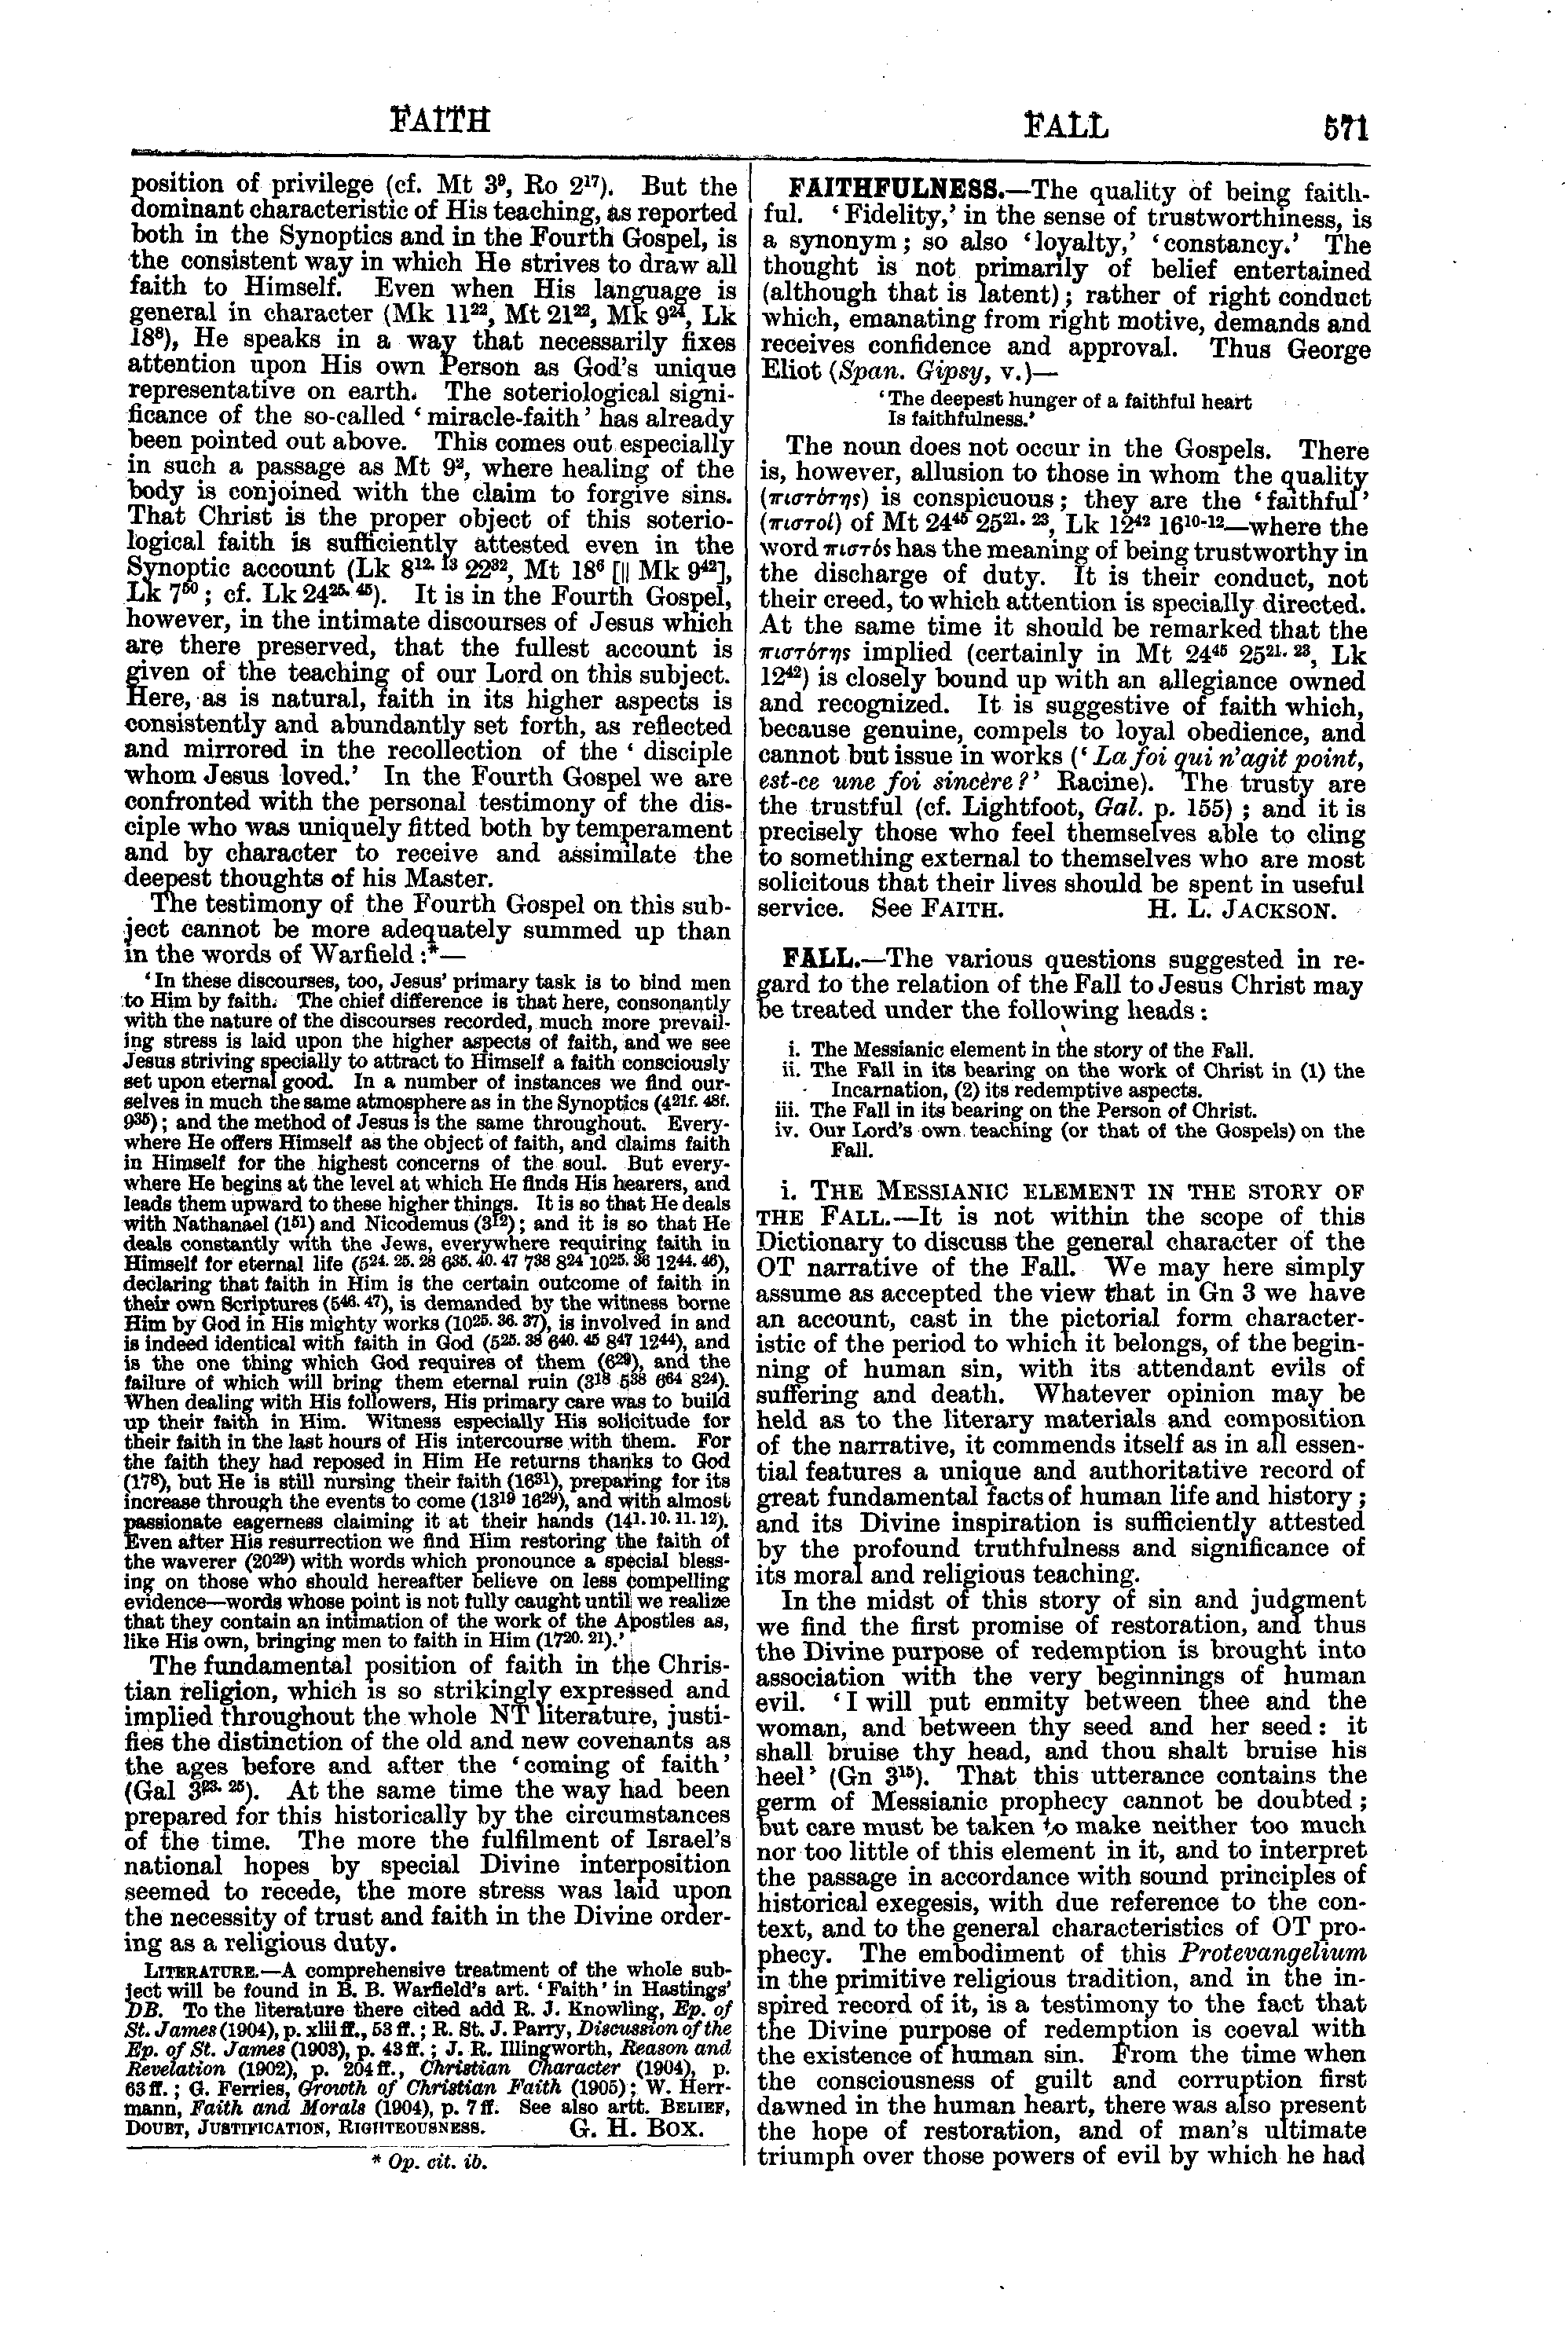 Image of page 571